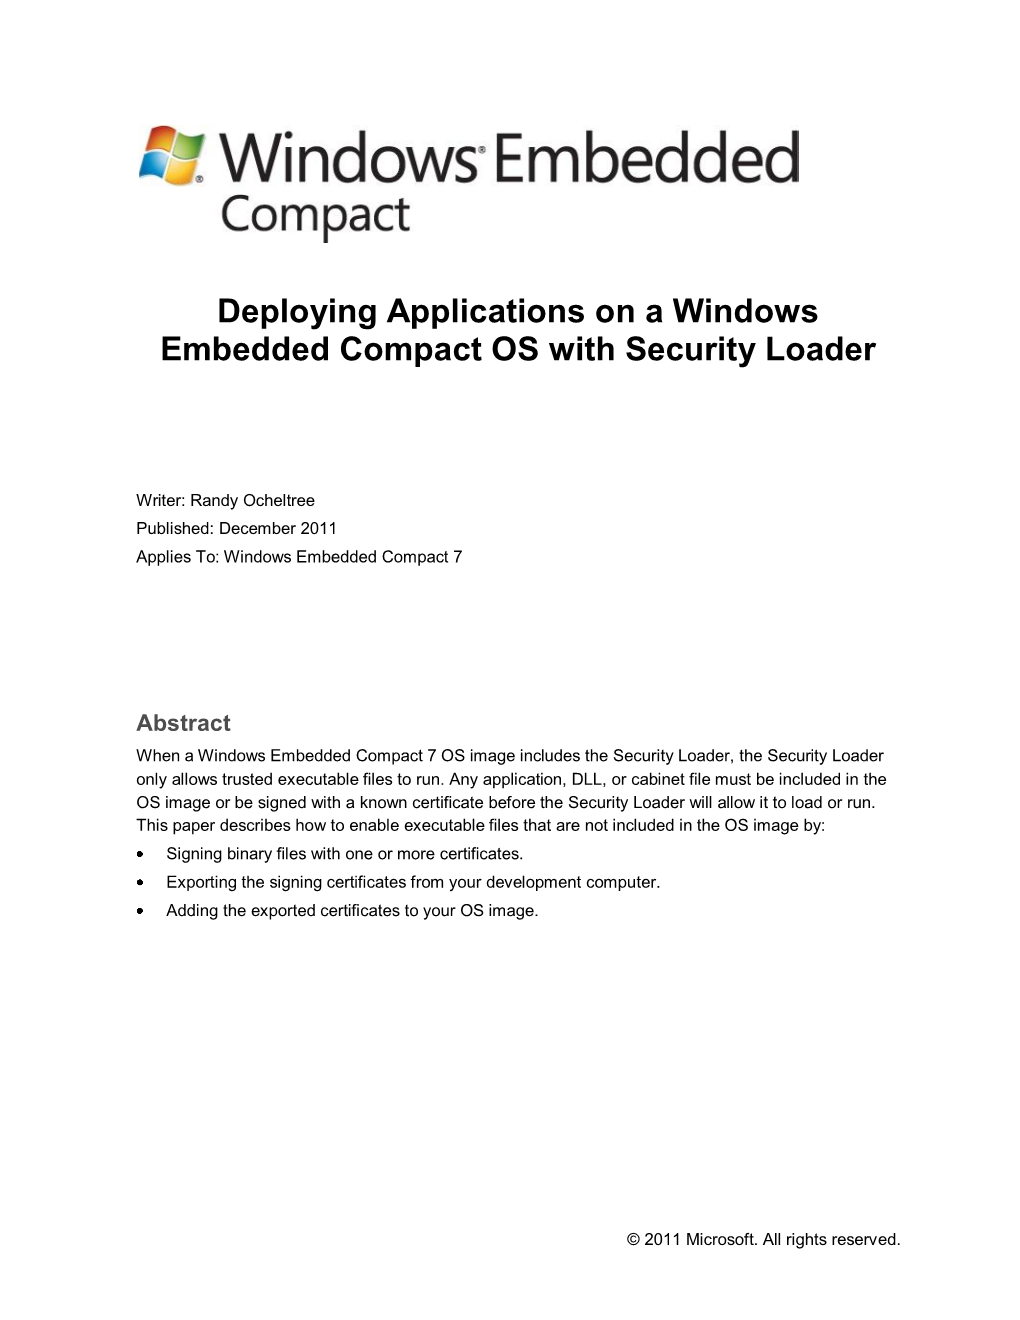 Deploying Applications on a Windows Embedded Compact OS with Security Loader